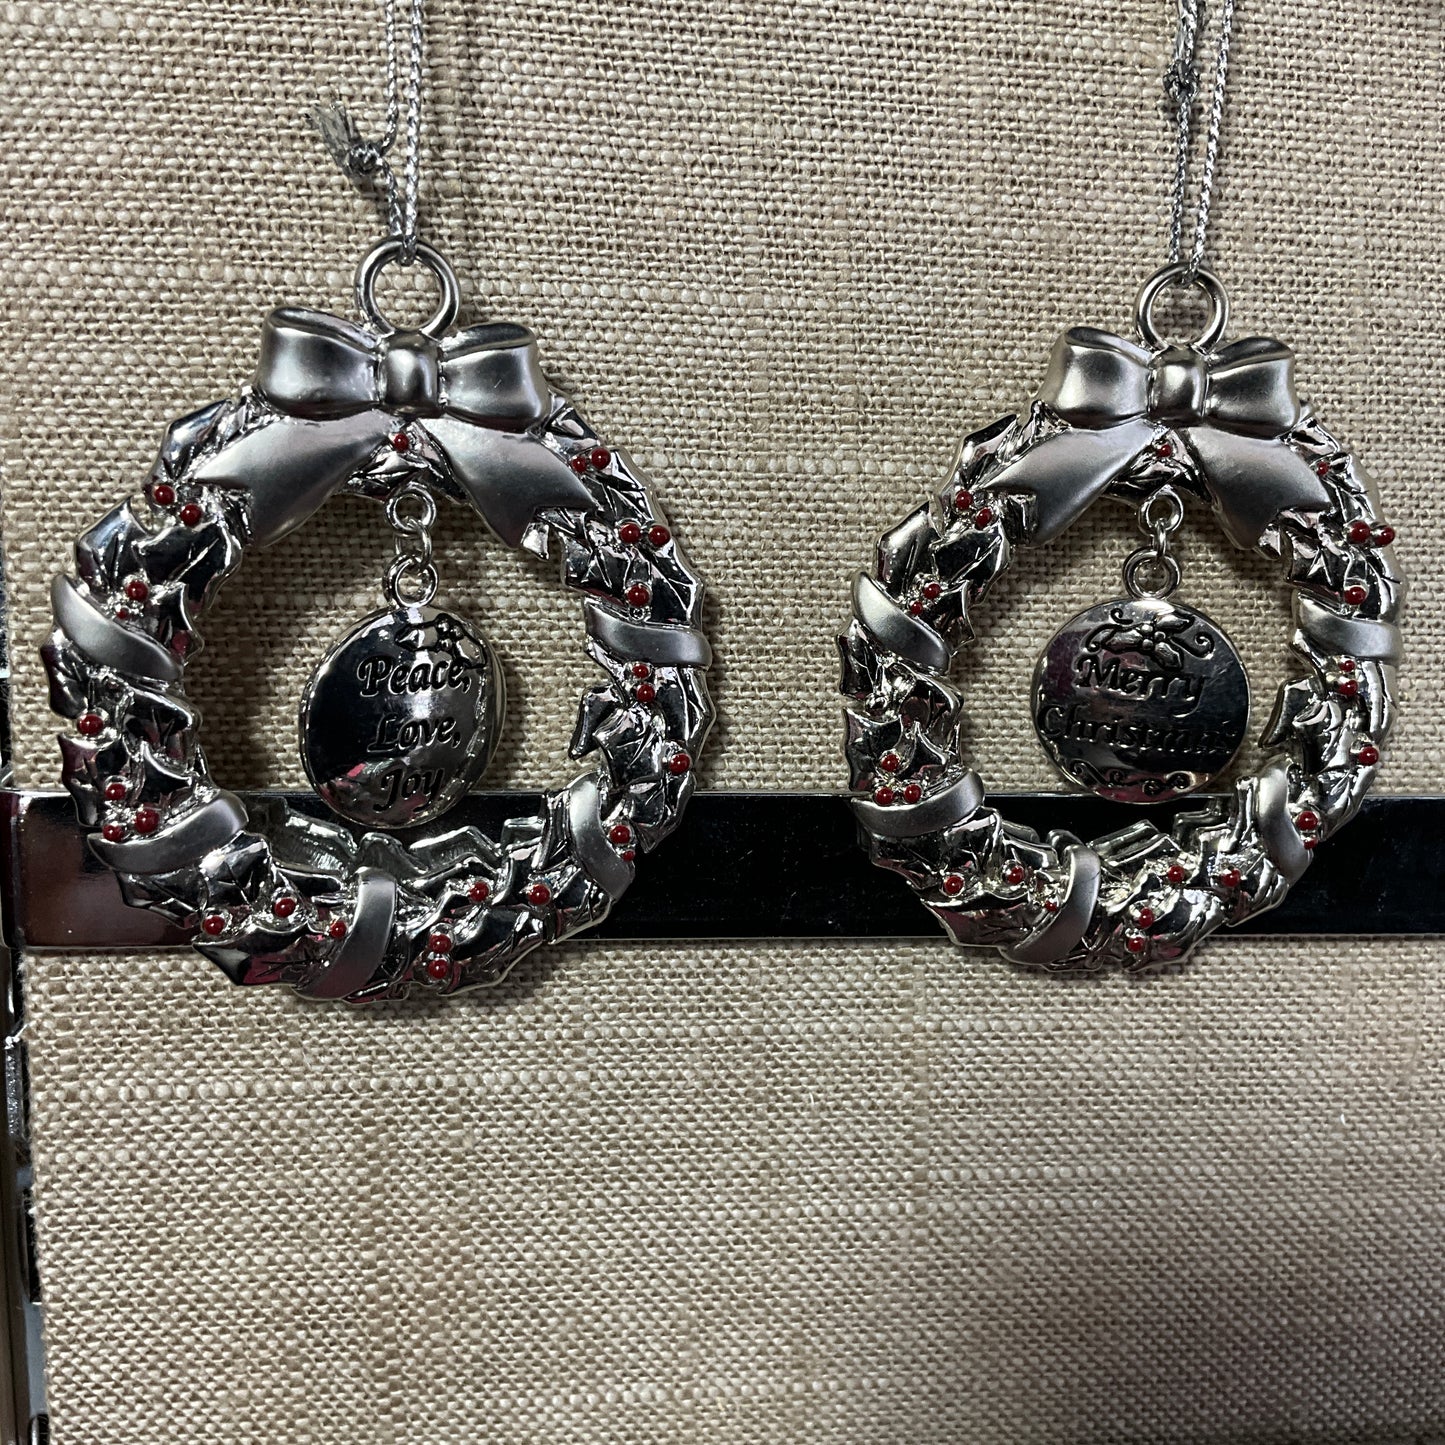 Wonderful wreaths set of 2 silver-tone with dangling Merry Christmas and Peace on Earth ornaments